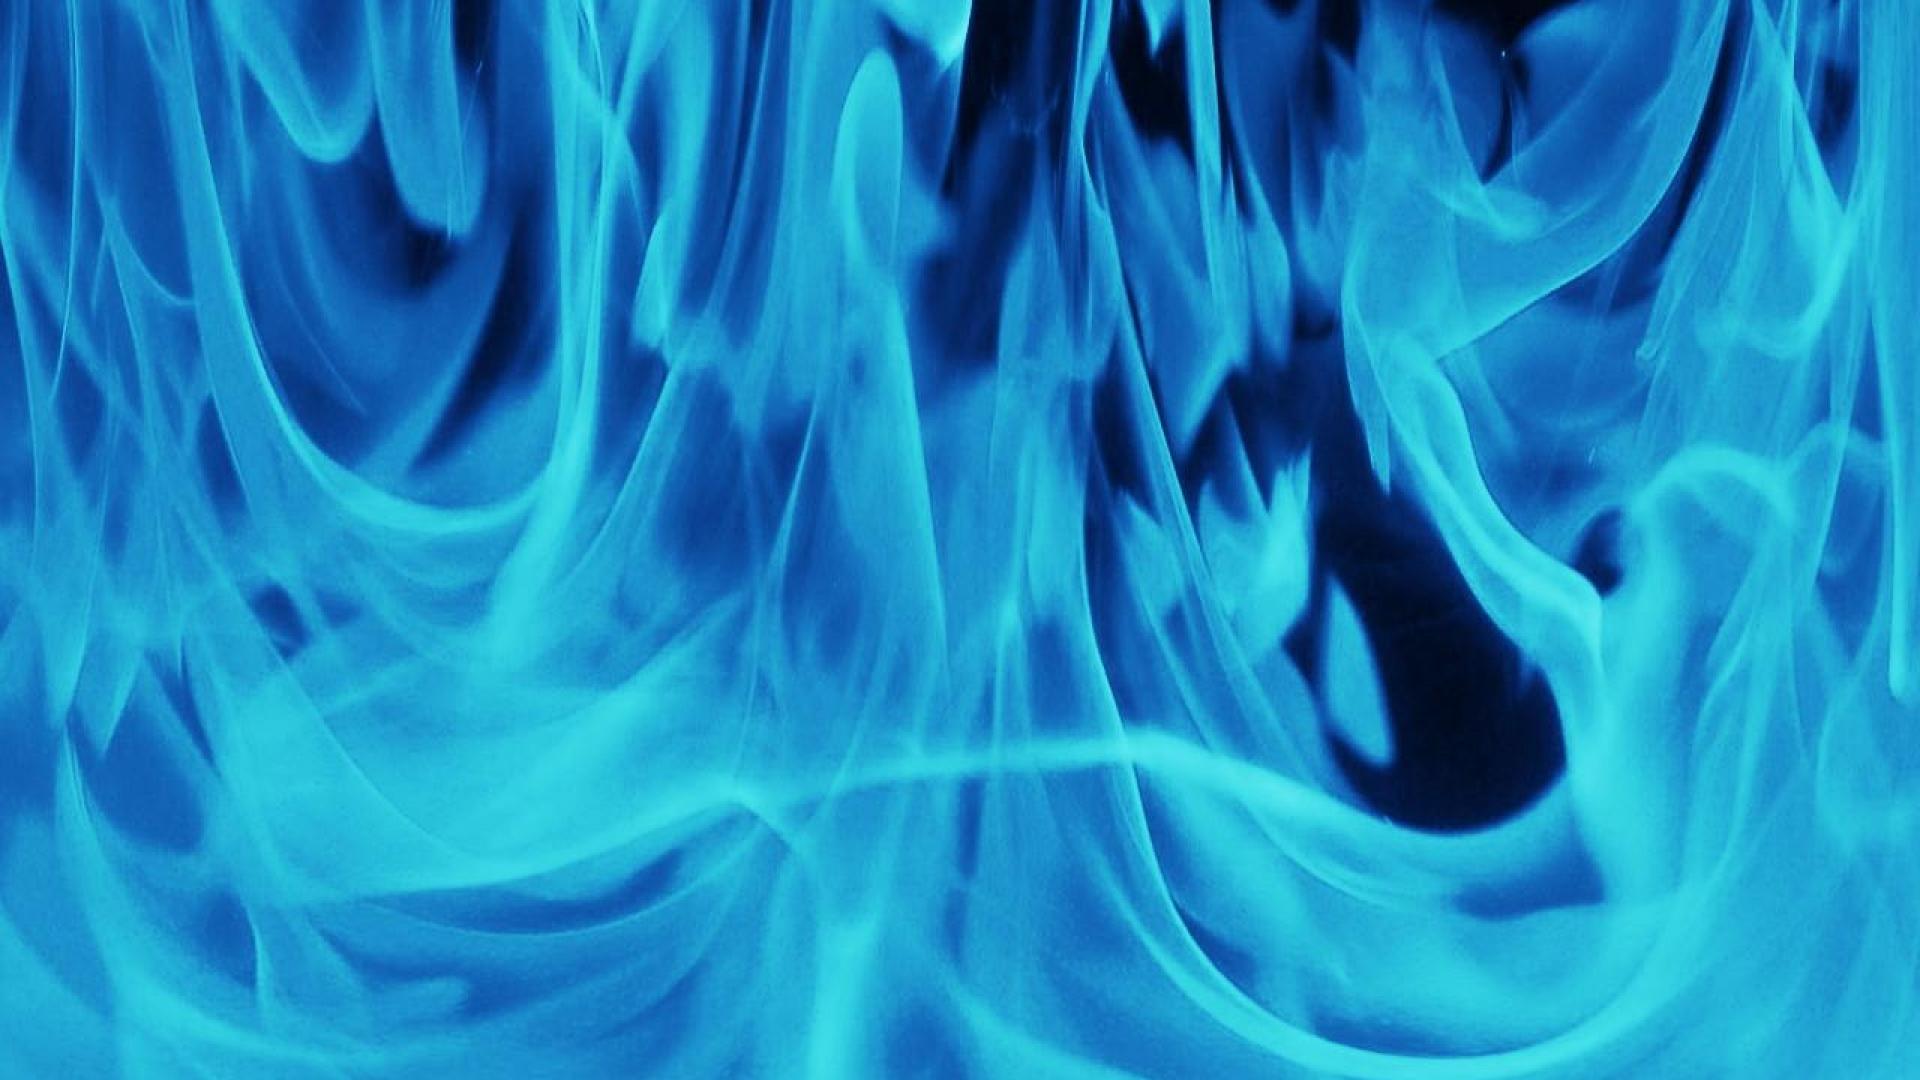 Blue Fire High Quality And Resolution Wallpaper On